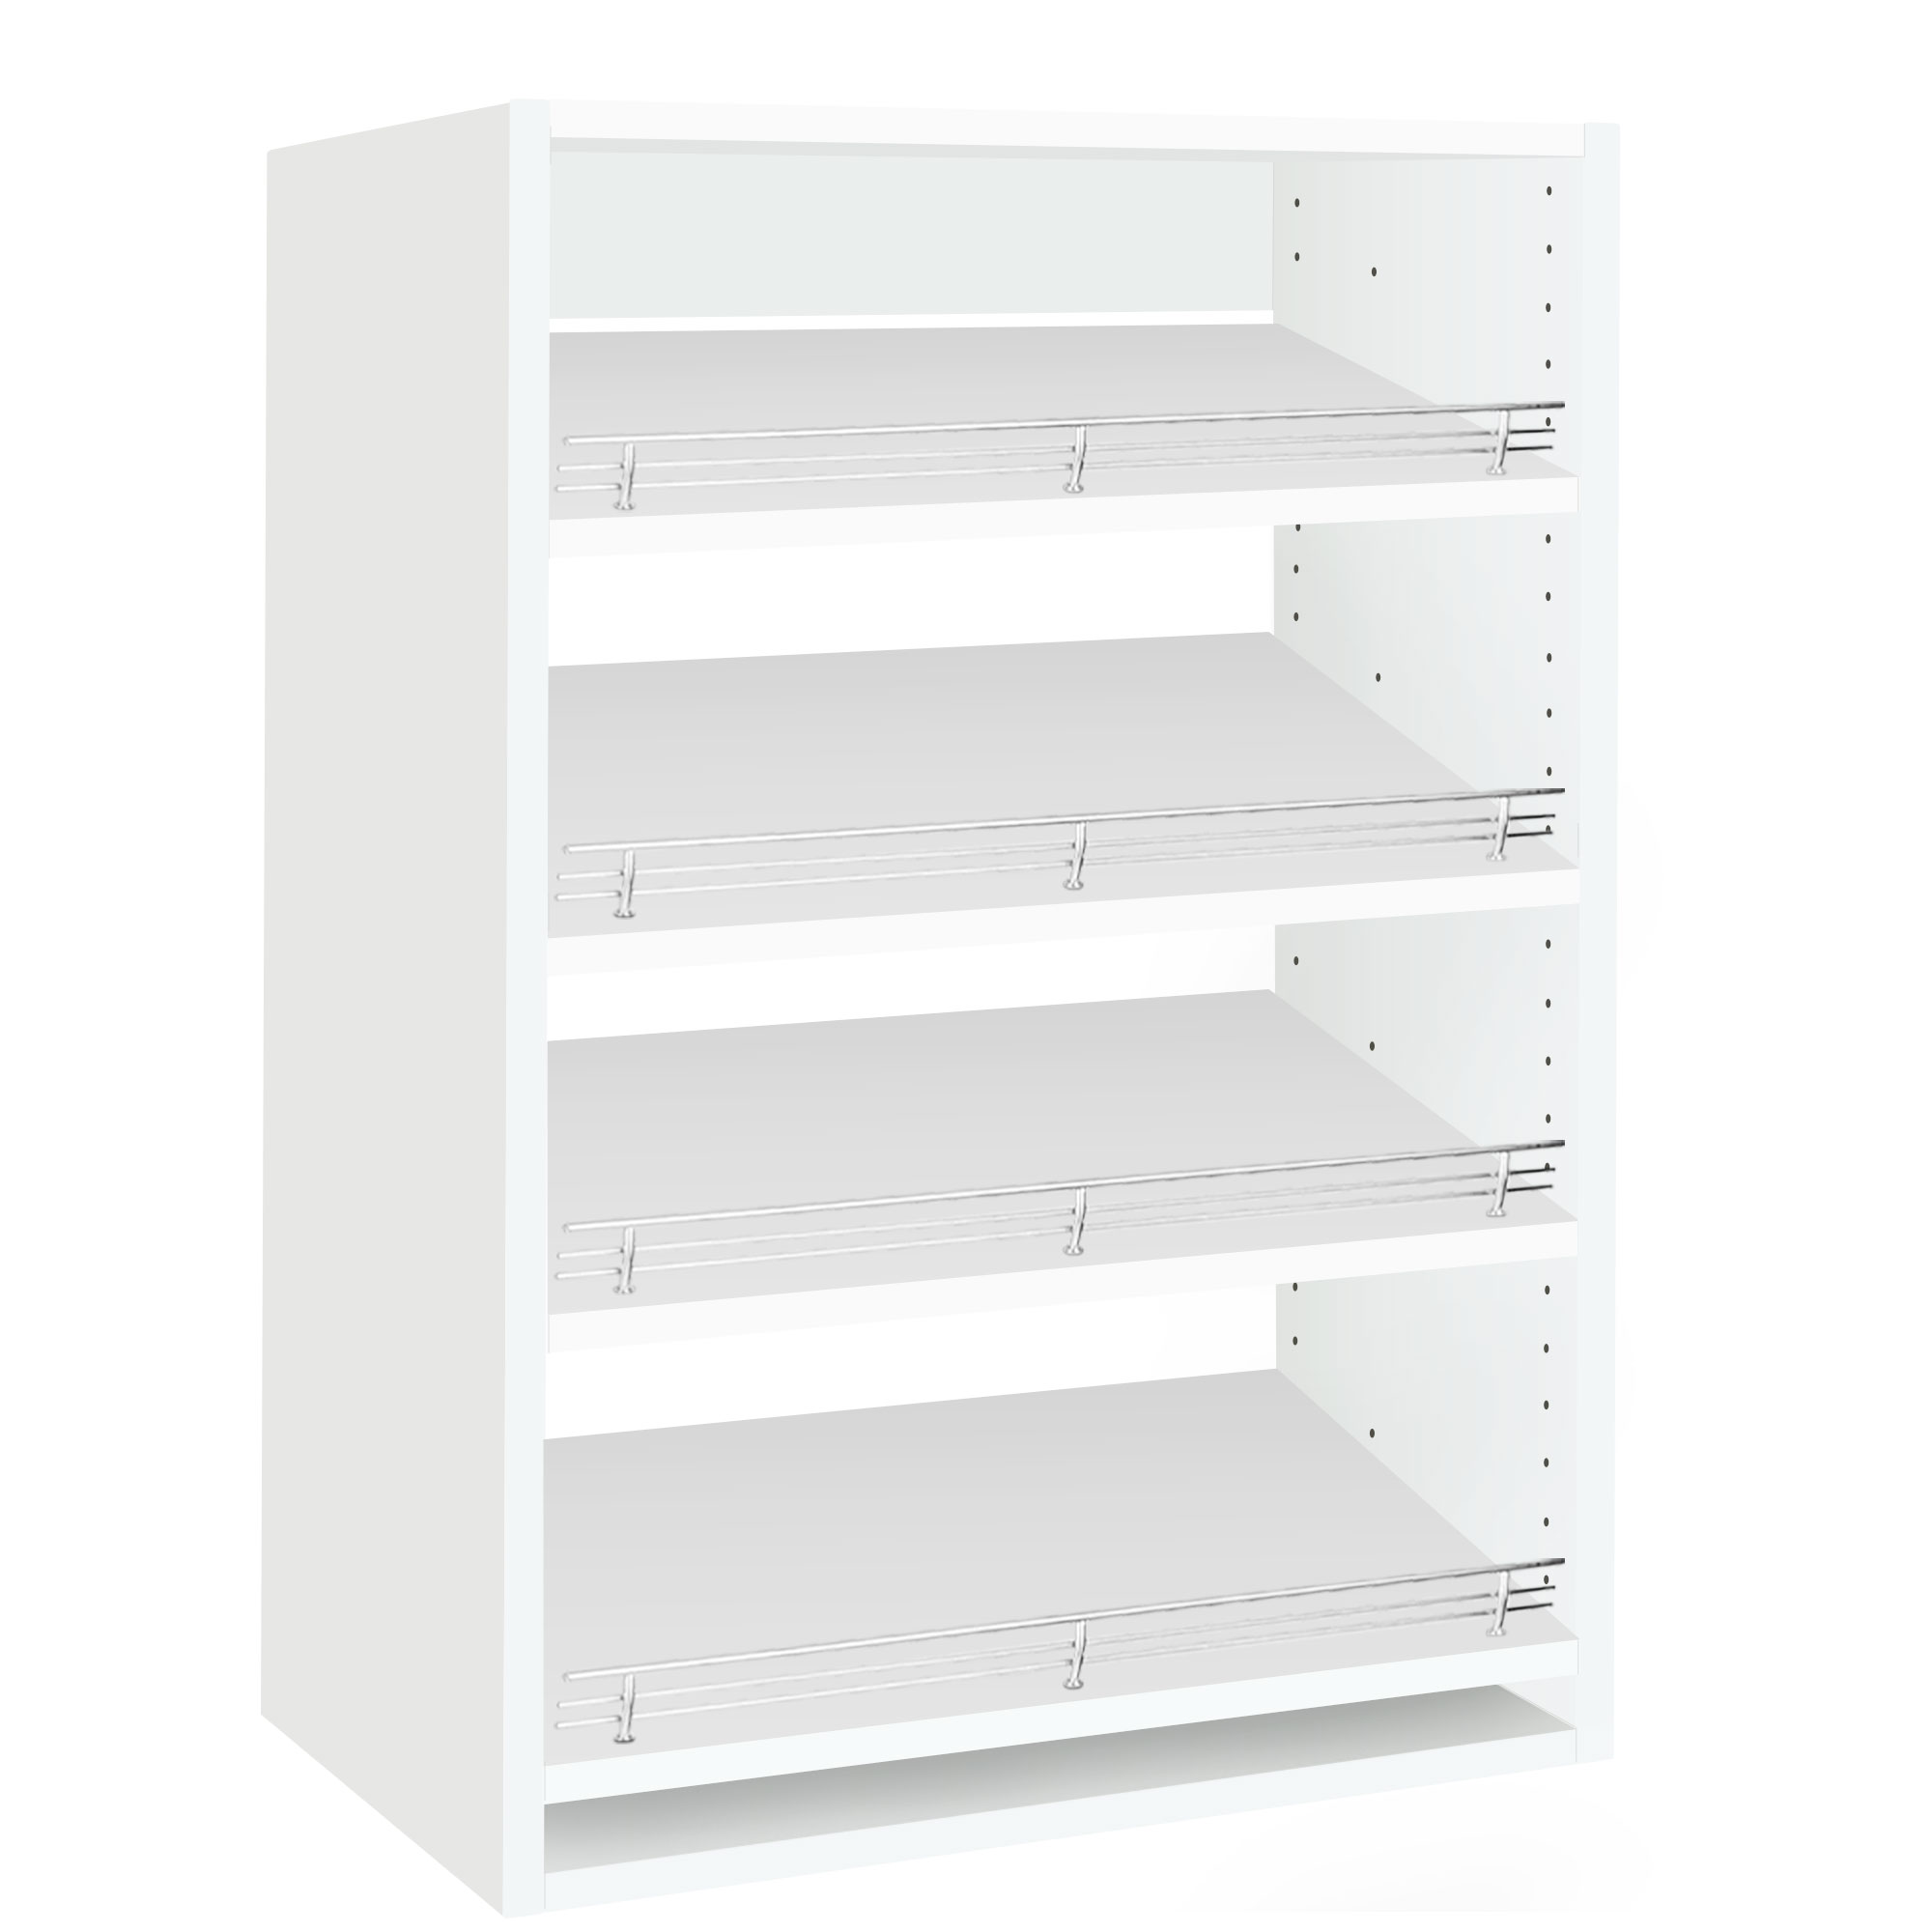 Tall Shoe Rack: Wood Shoe Rack For Closet [In Stock Now] White / Slanted (4  Shelves) / 31.5 Wide